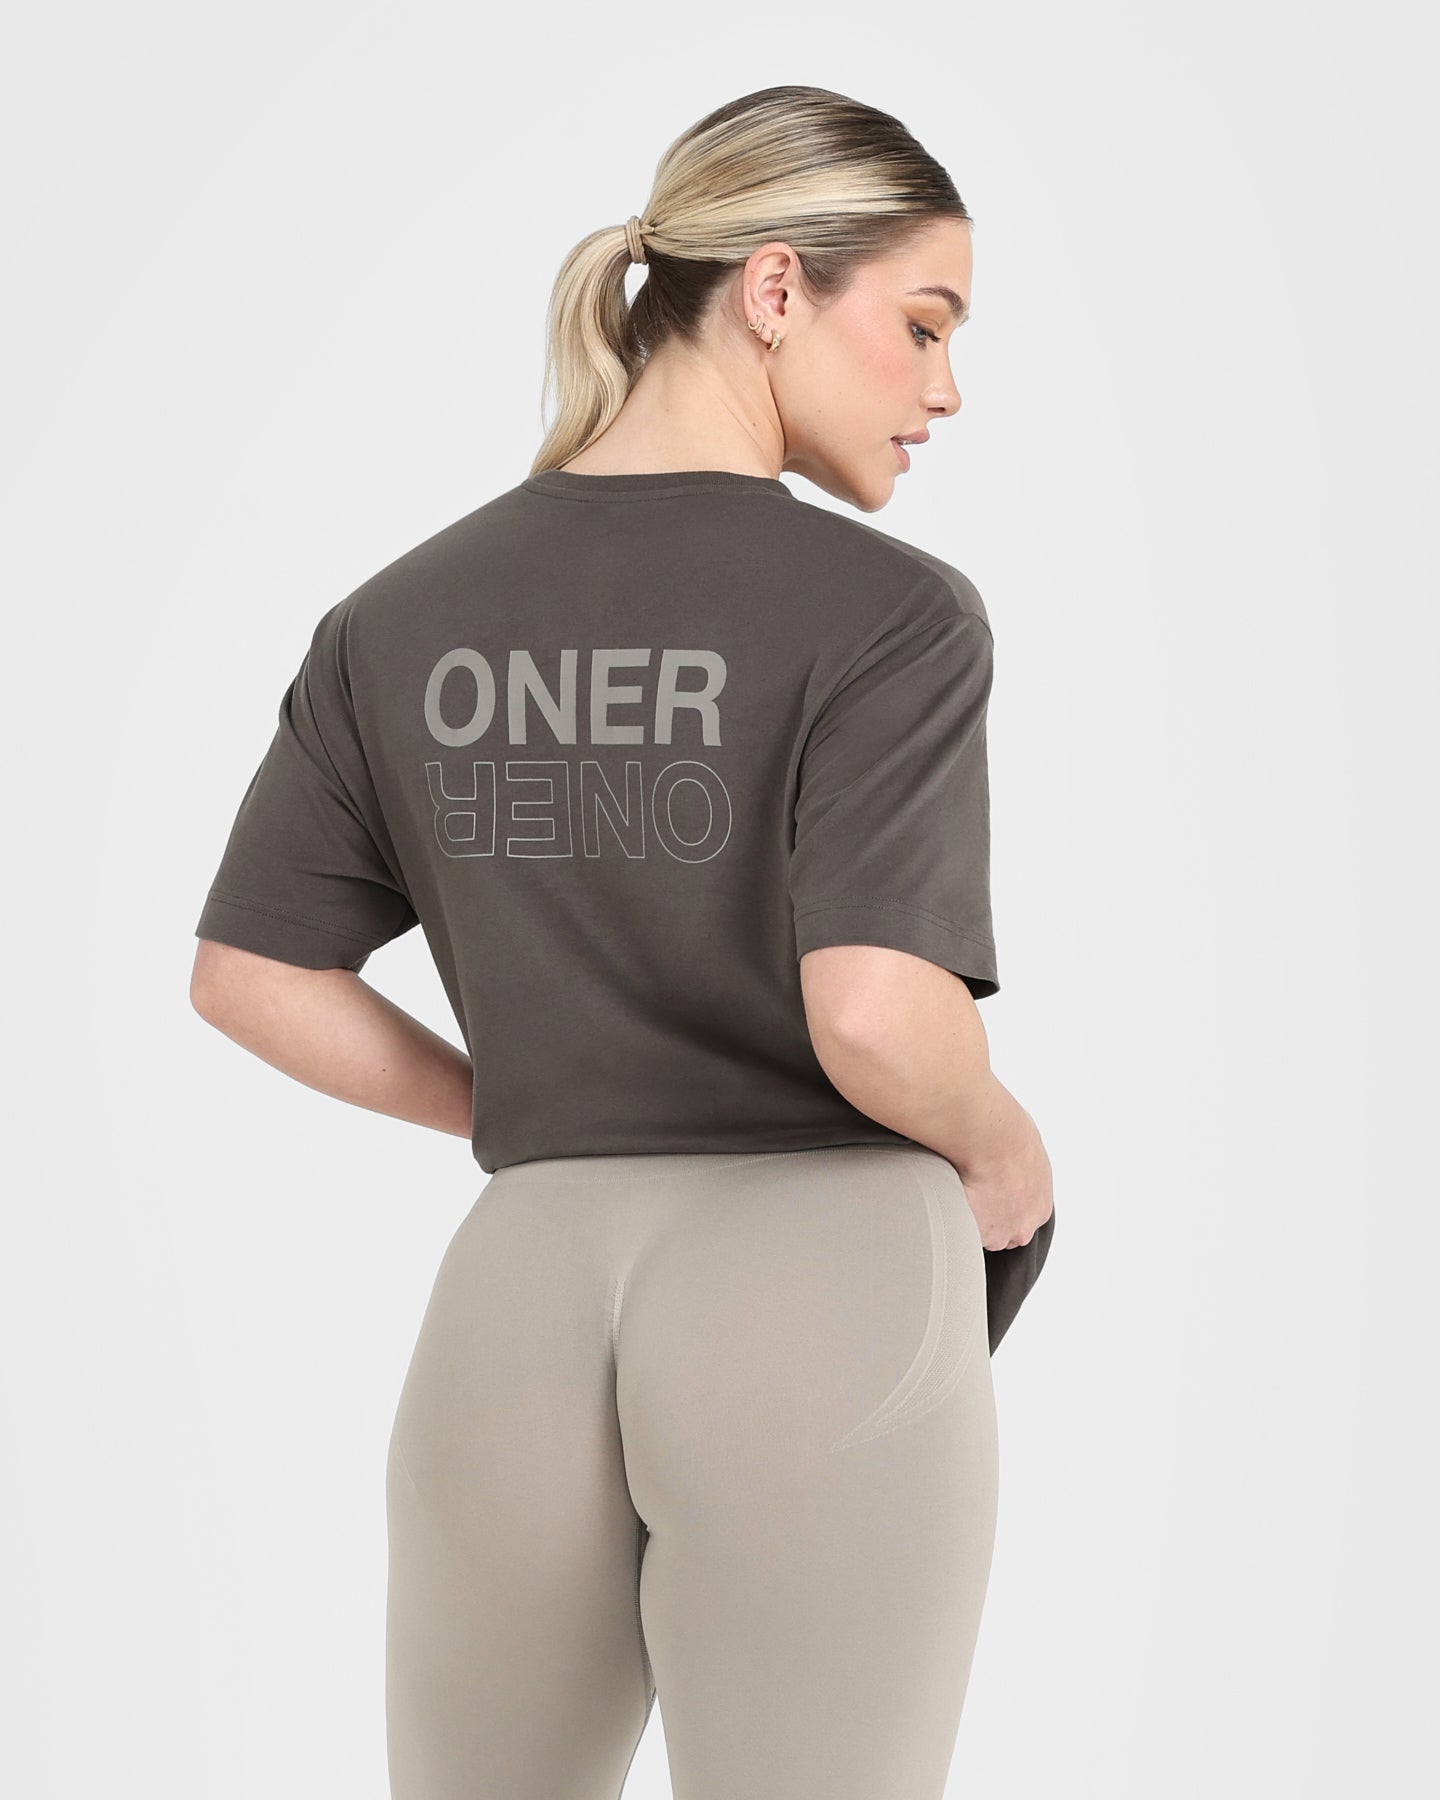 oner active tees dupes｜TikTok Search